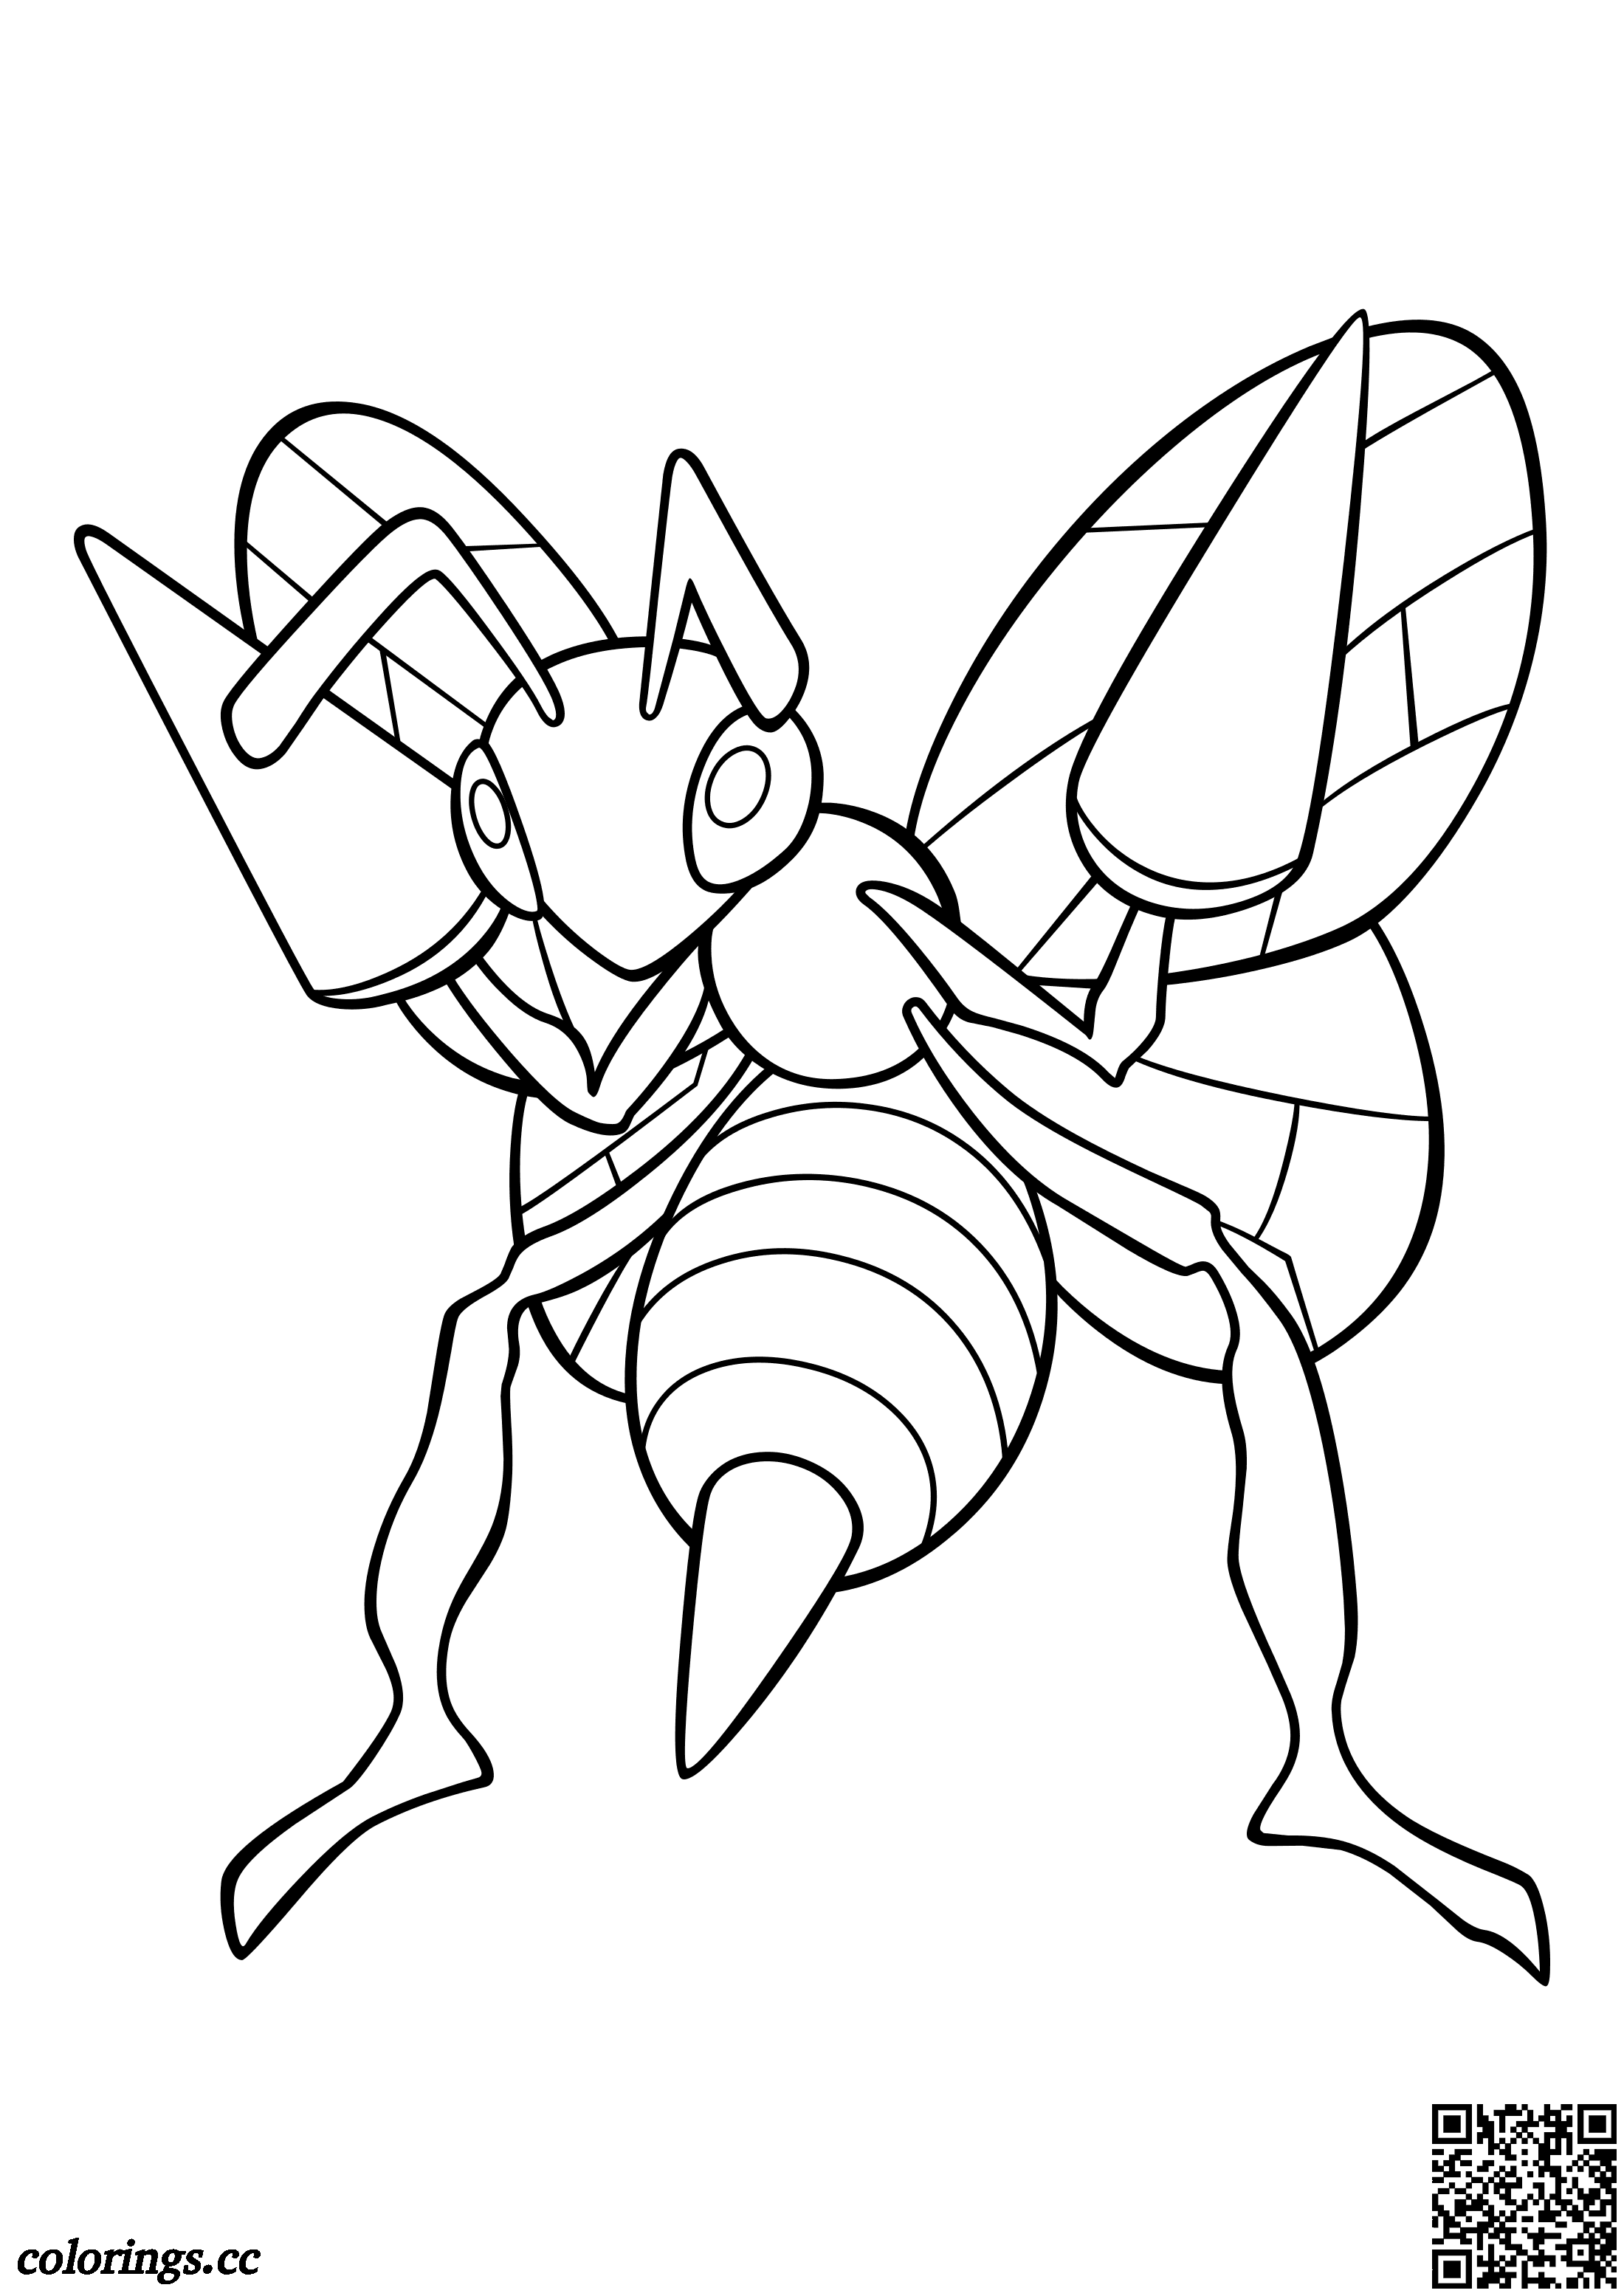 015 - Beedrill coloring pages, Pokemon coloring pages - Colorings.cc